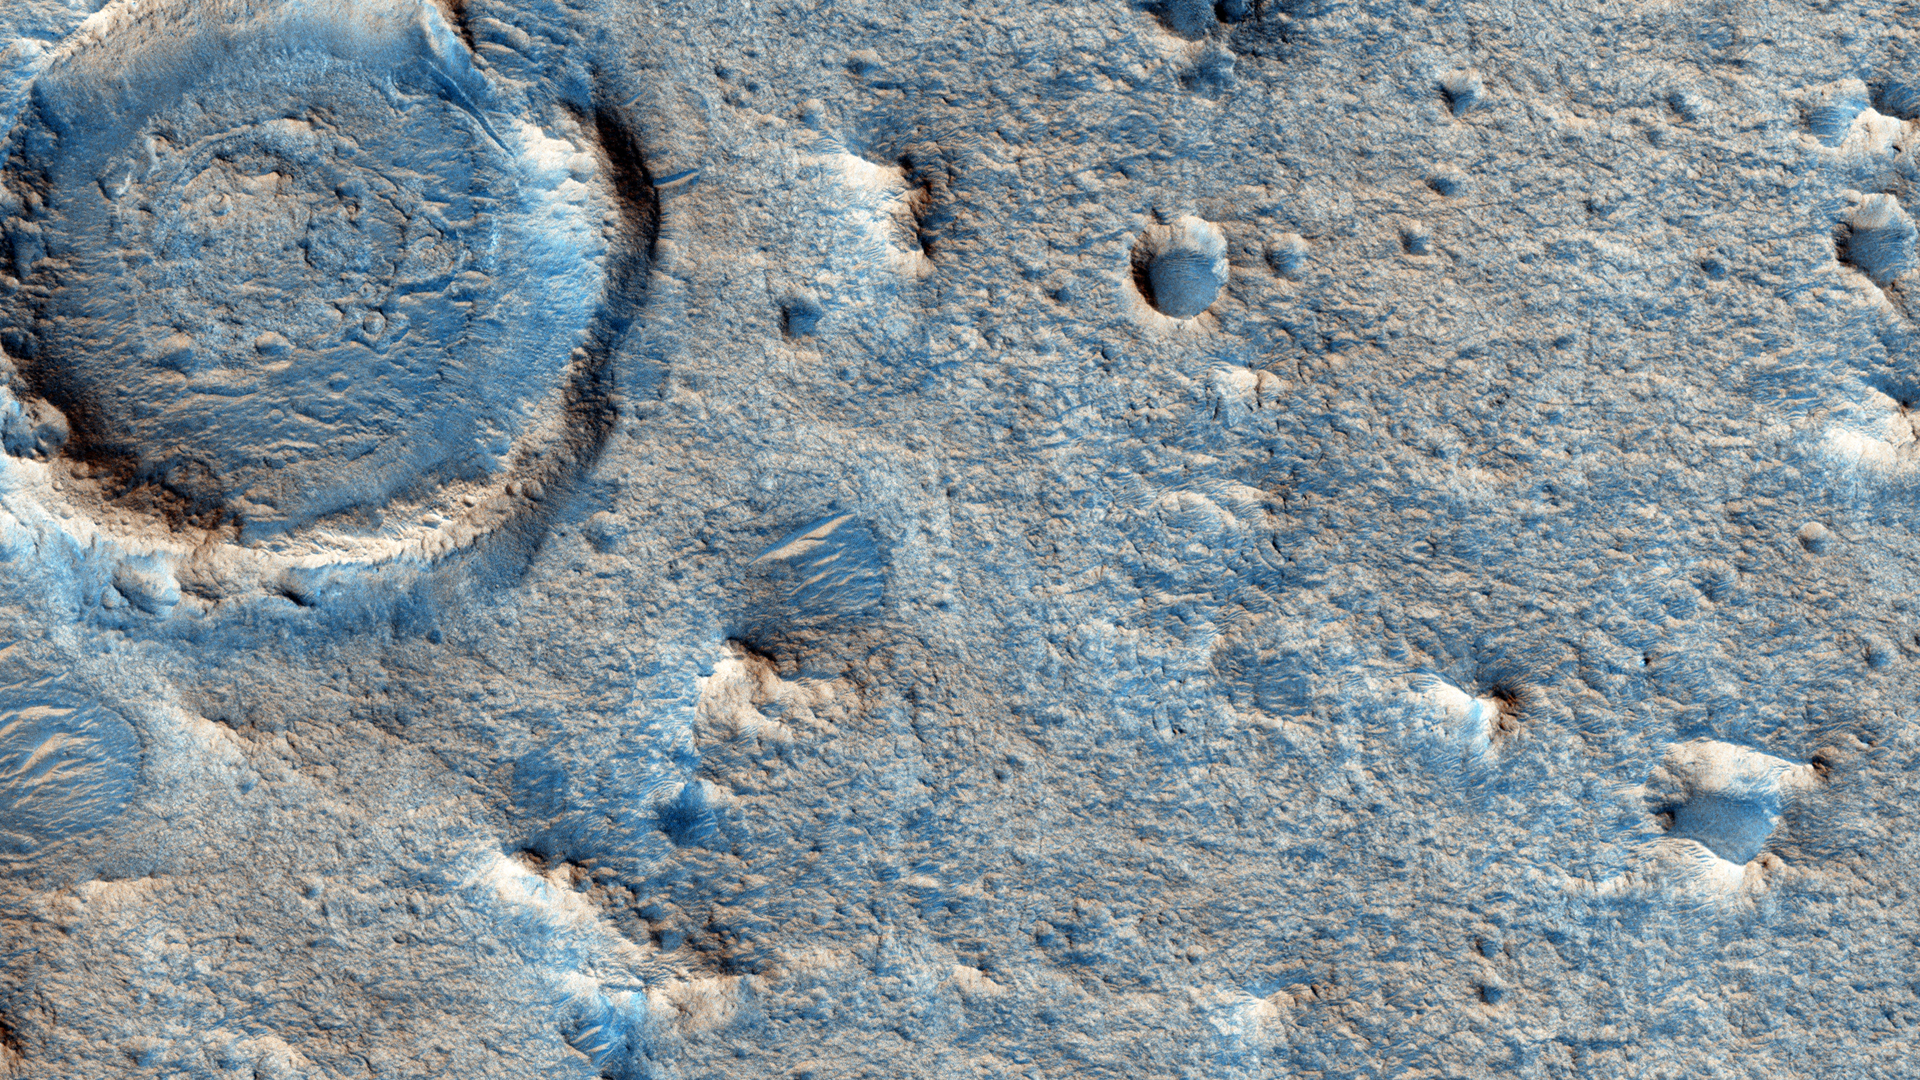 The ExoMars landing site on Oxia Planum is an ancient area that could contain traces of past lives.